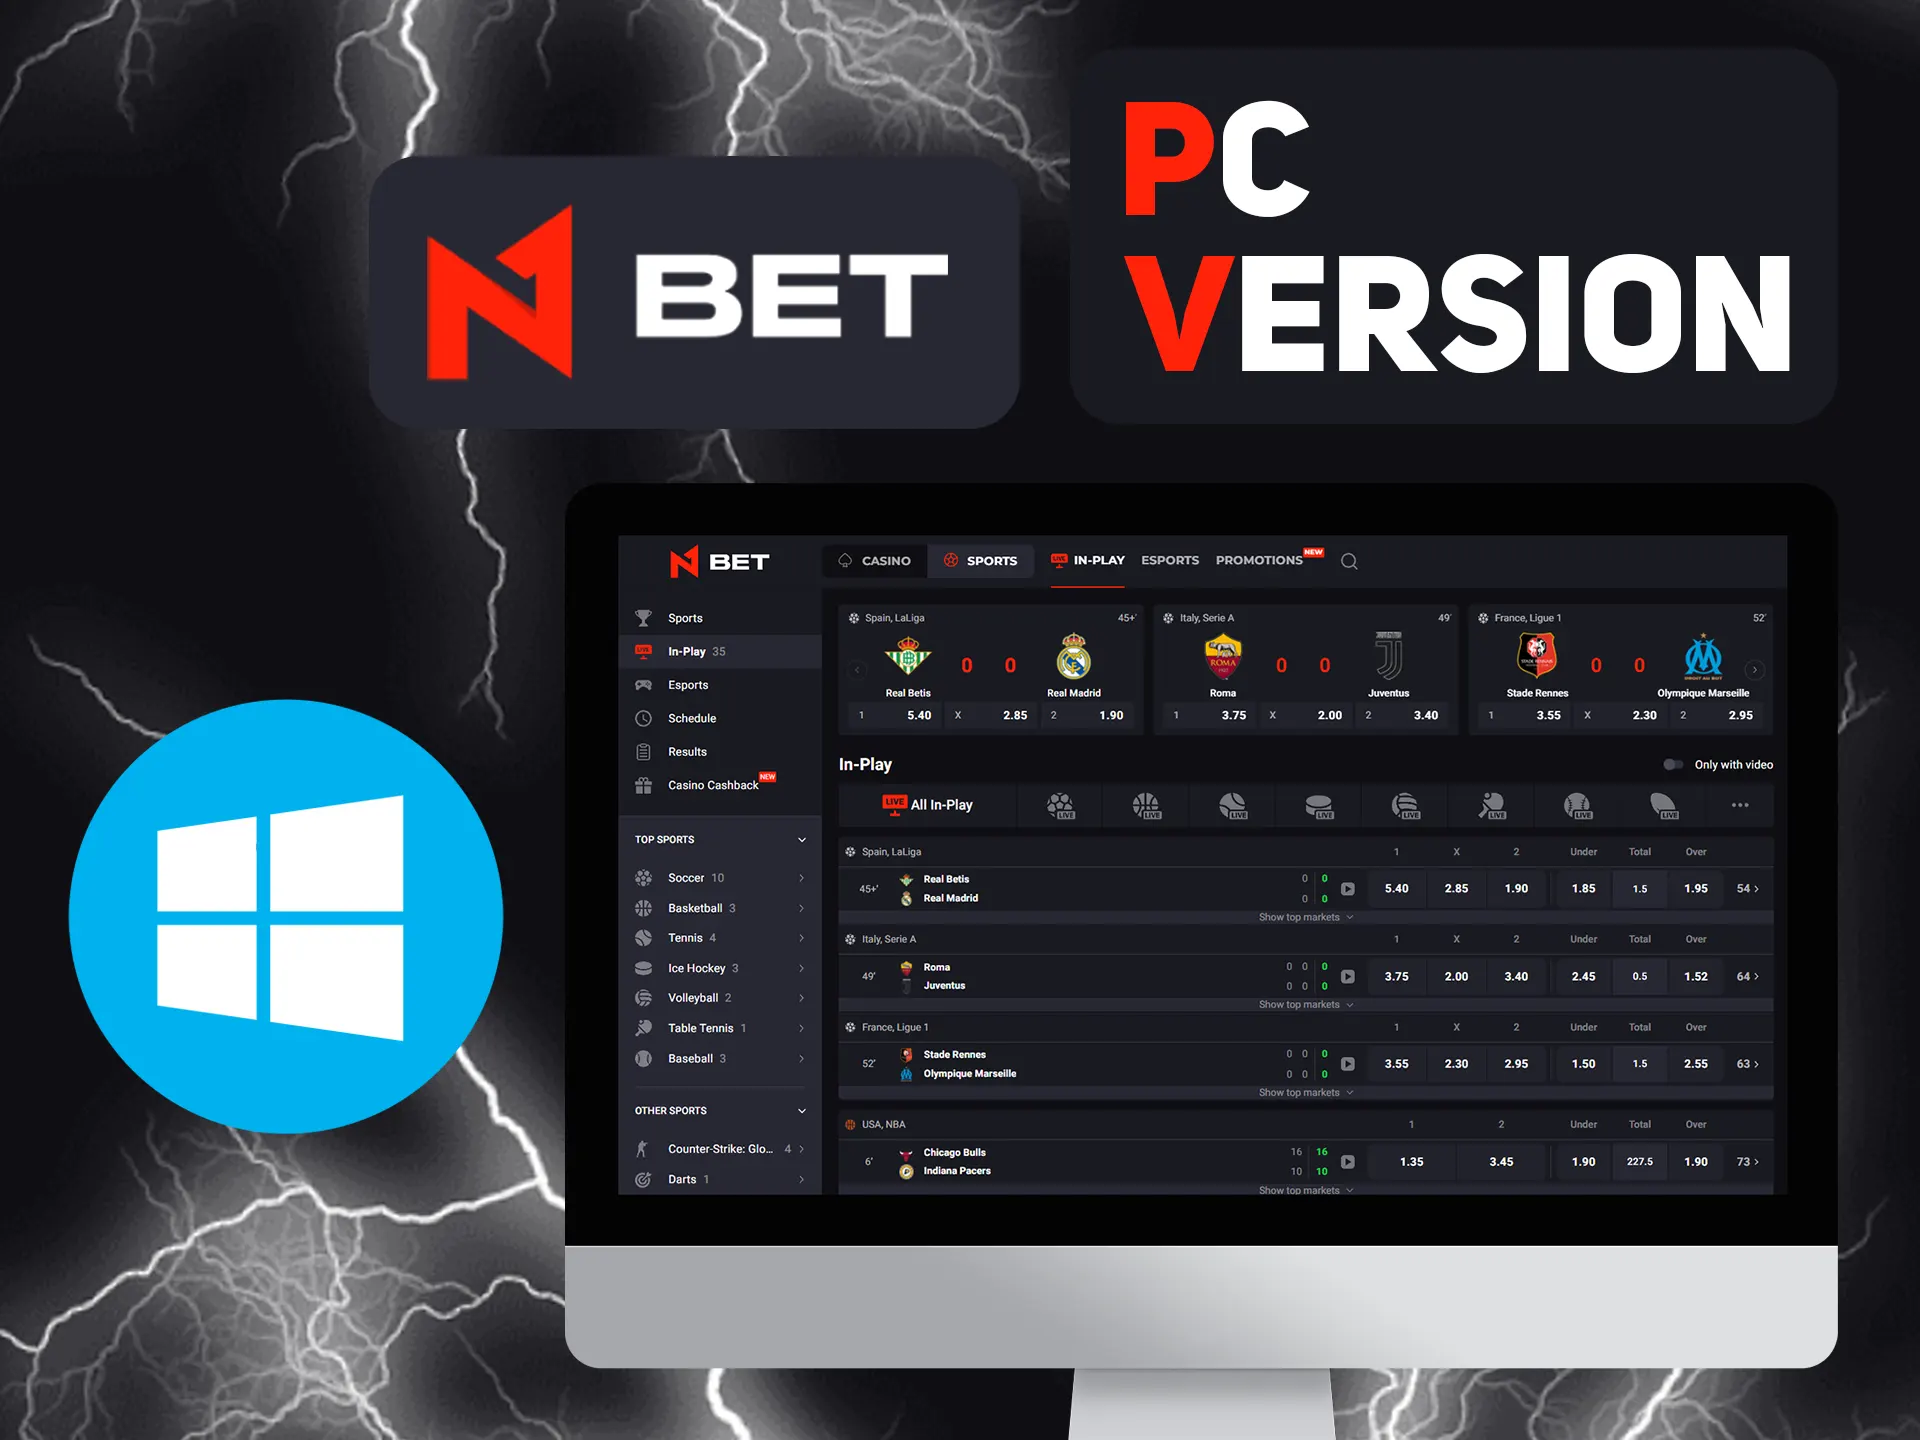 Use N1bet website on any PC device.